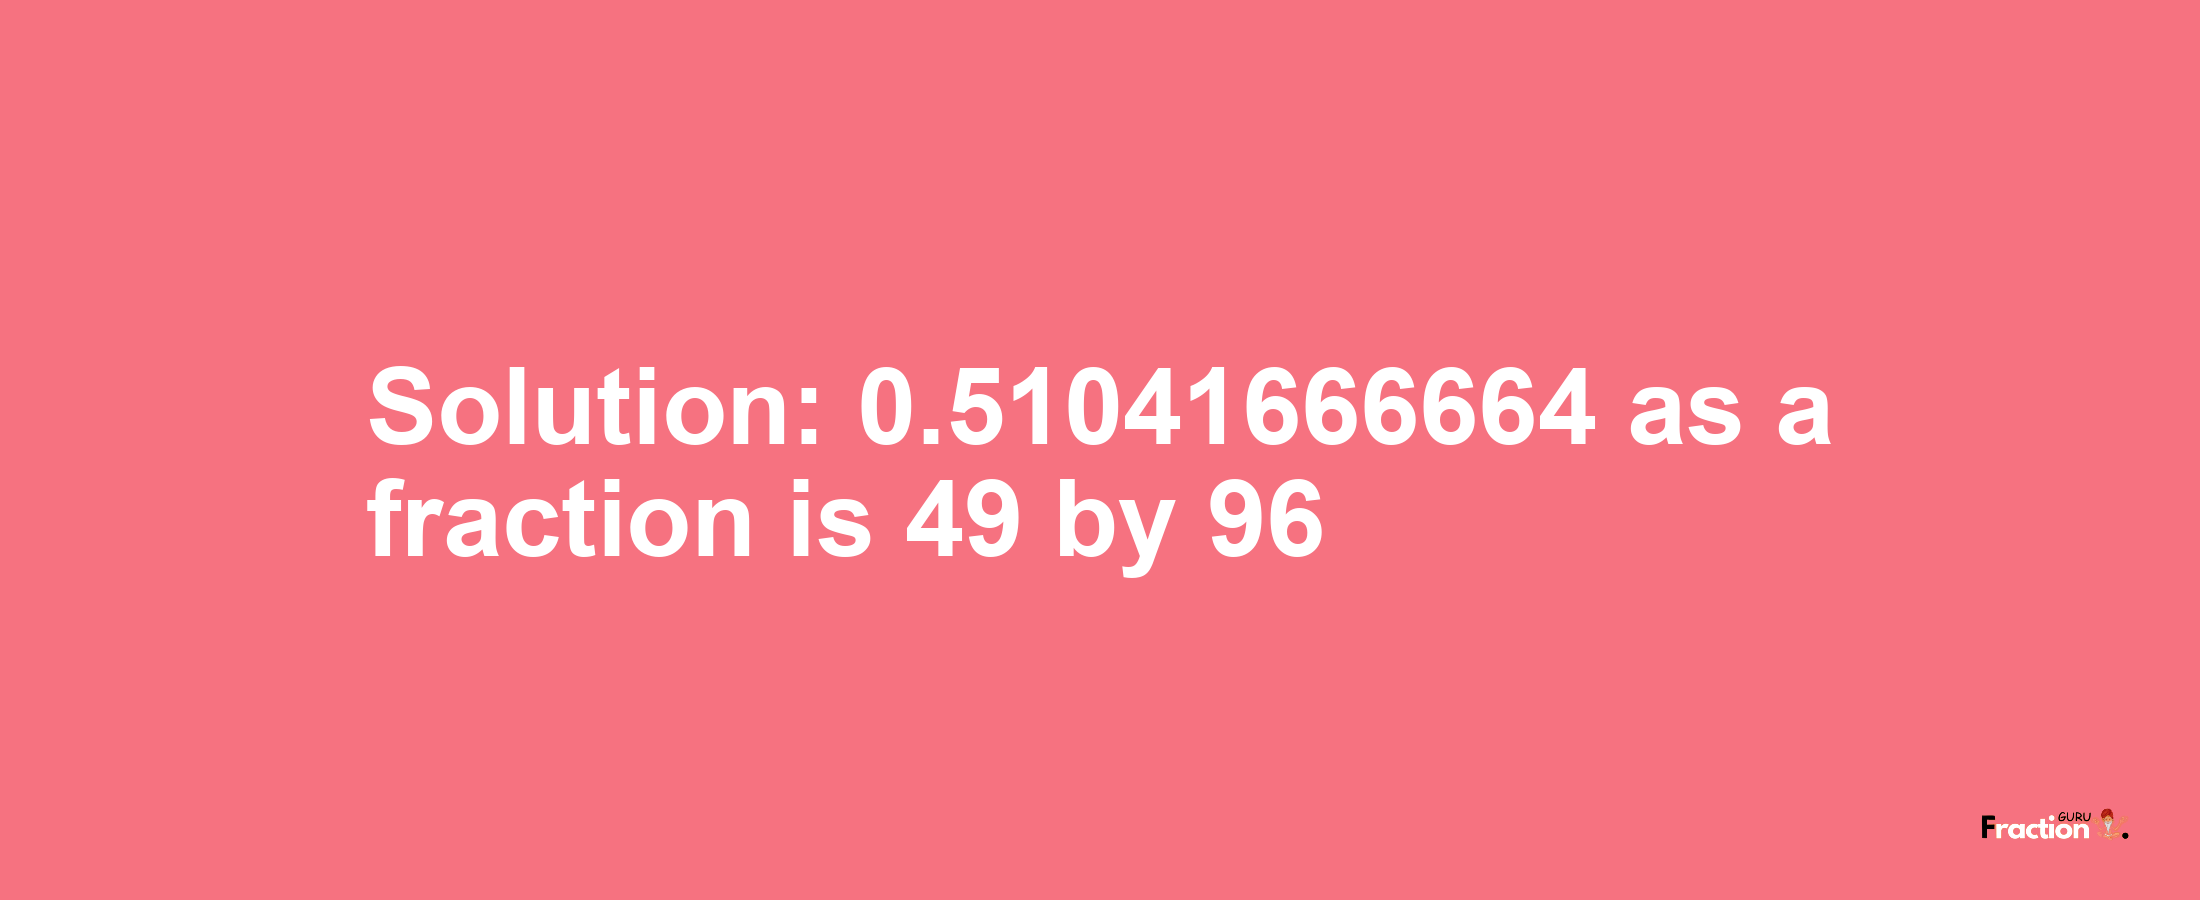 Solution:0.51041666664 as a fraction is 49/96